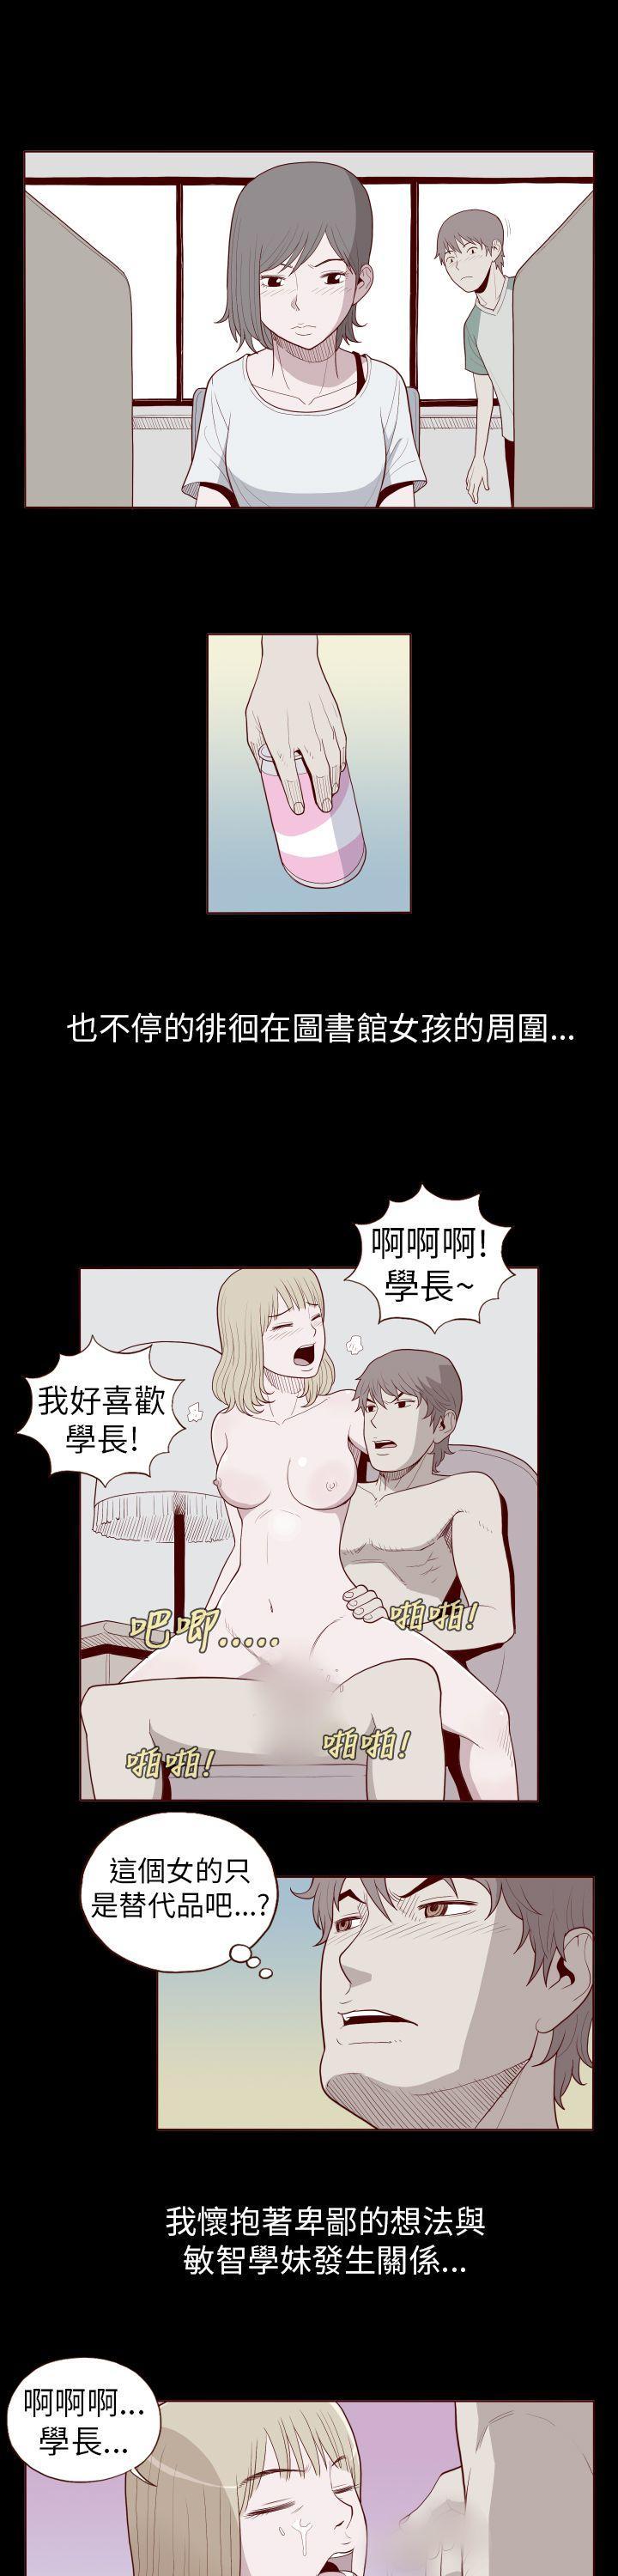 Roughsex 淫亂魔鬼 Studs - Page 5